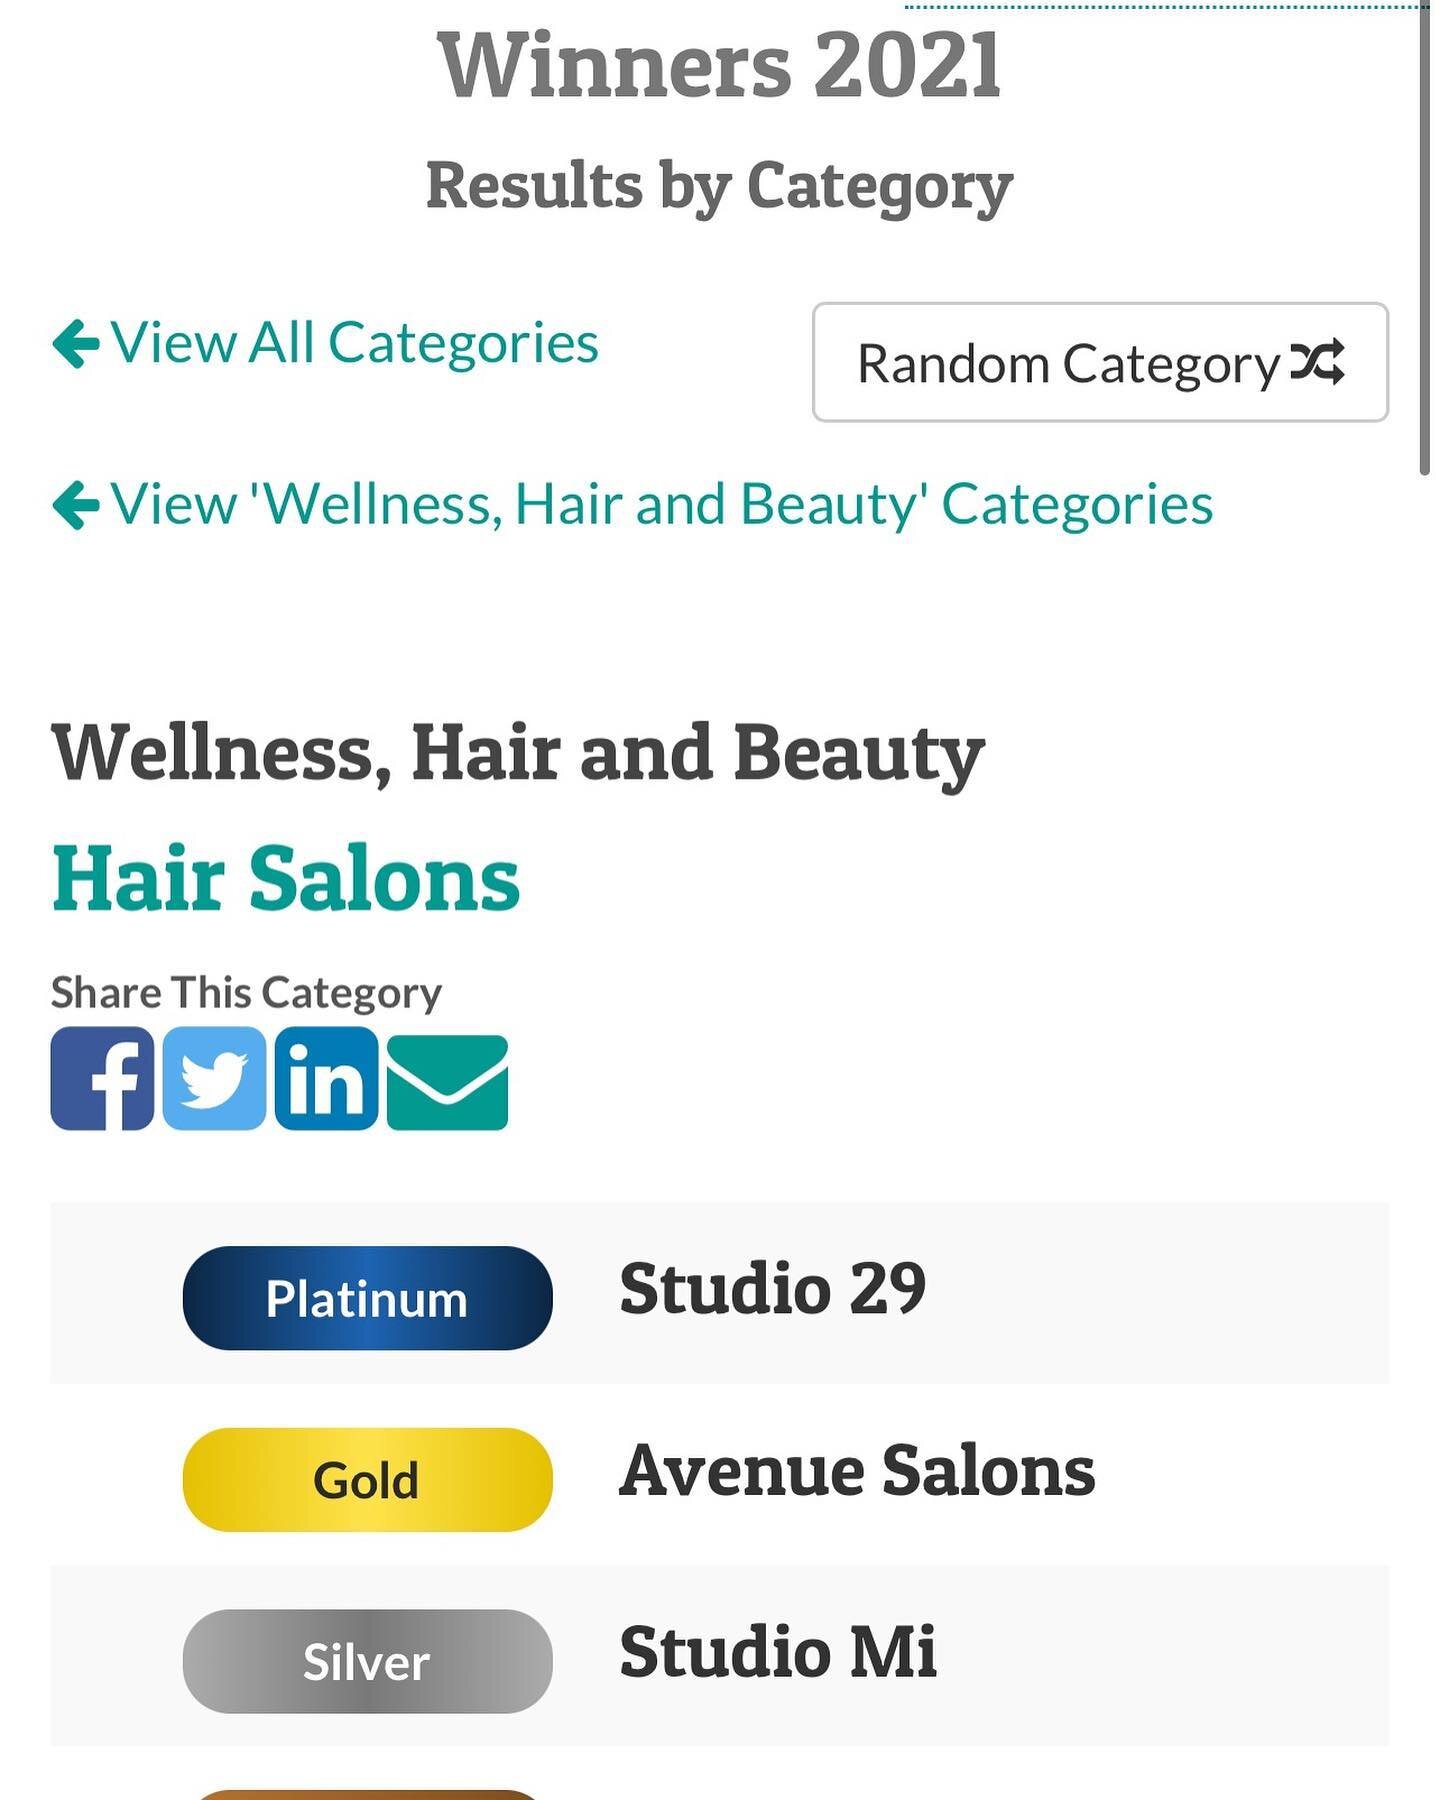 WE ARE IN SHOCK!!! 

We won salon community awards!
It has been a really hard year and I am so so proud of my team and could not thank everyone enough for voting.
#brb gonna cry all day @moodlashstudio @andreababichair @balayageorbust @lishkaara_beau